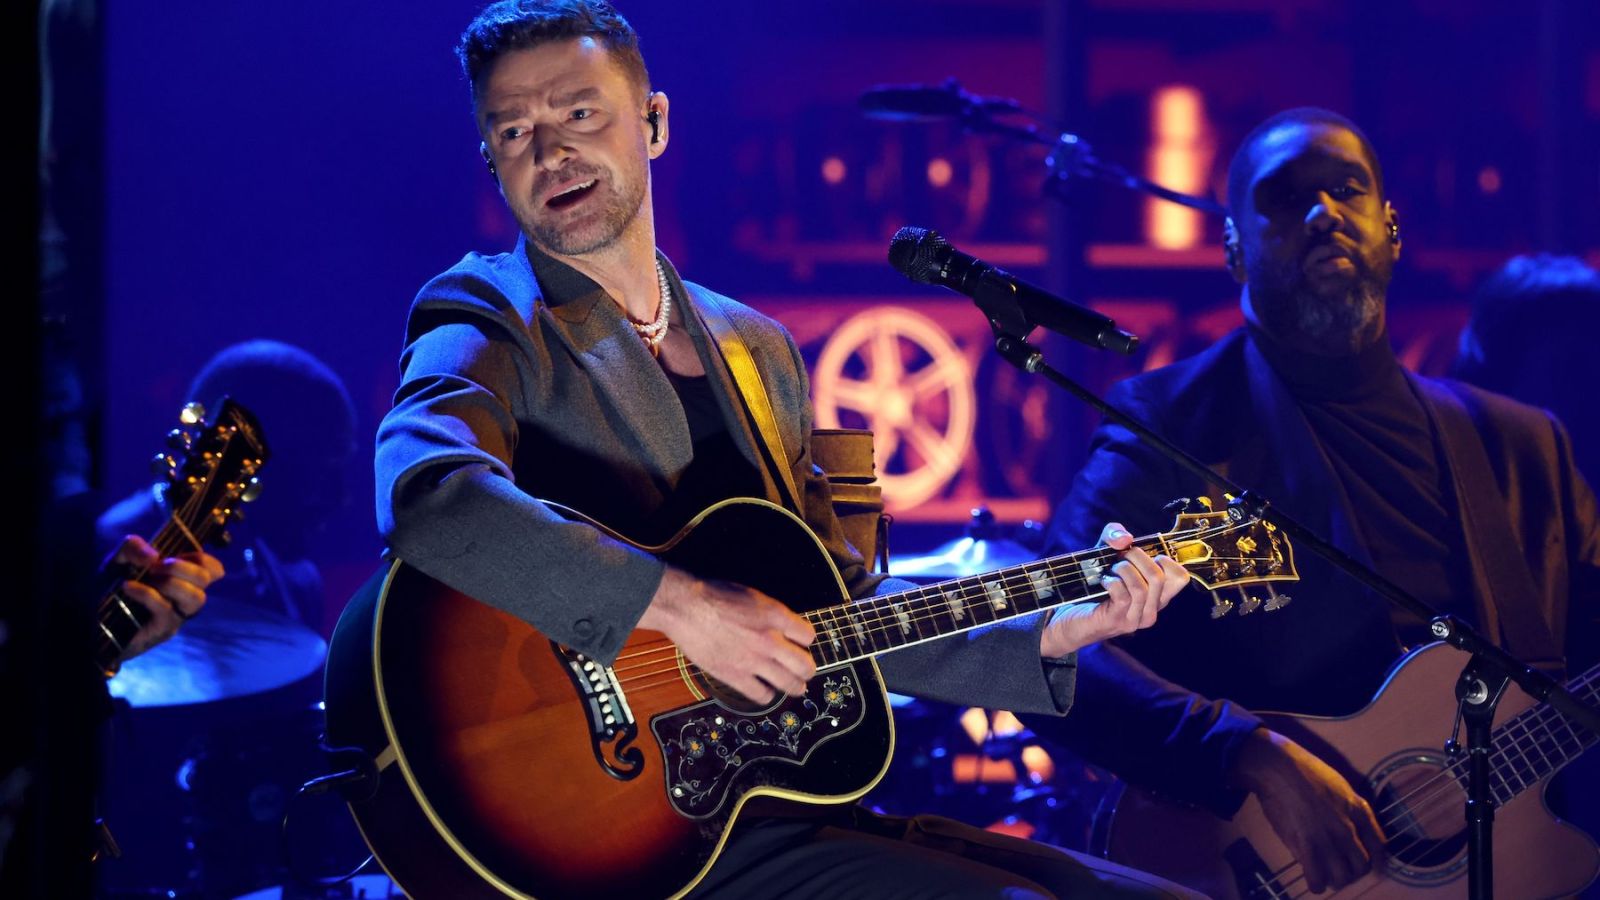 Justin Timberlake Pleads Not Guilty to DWI Charge, License Suspended in New York